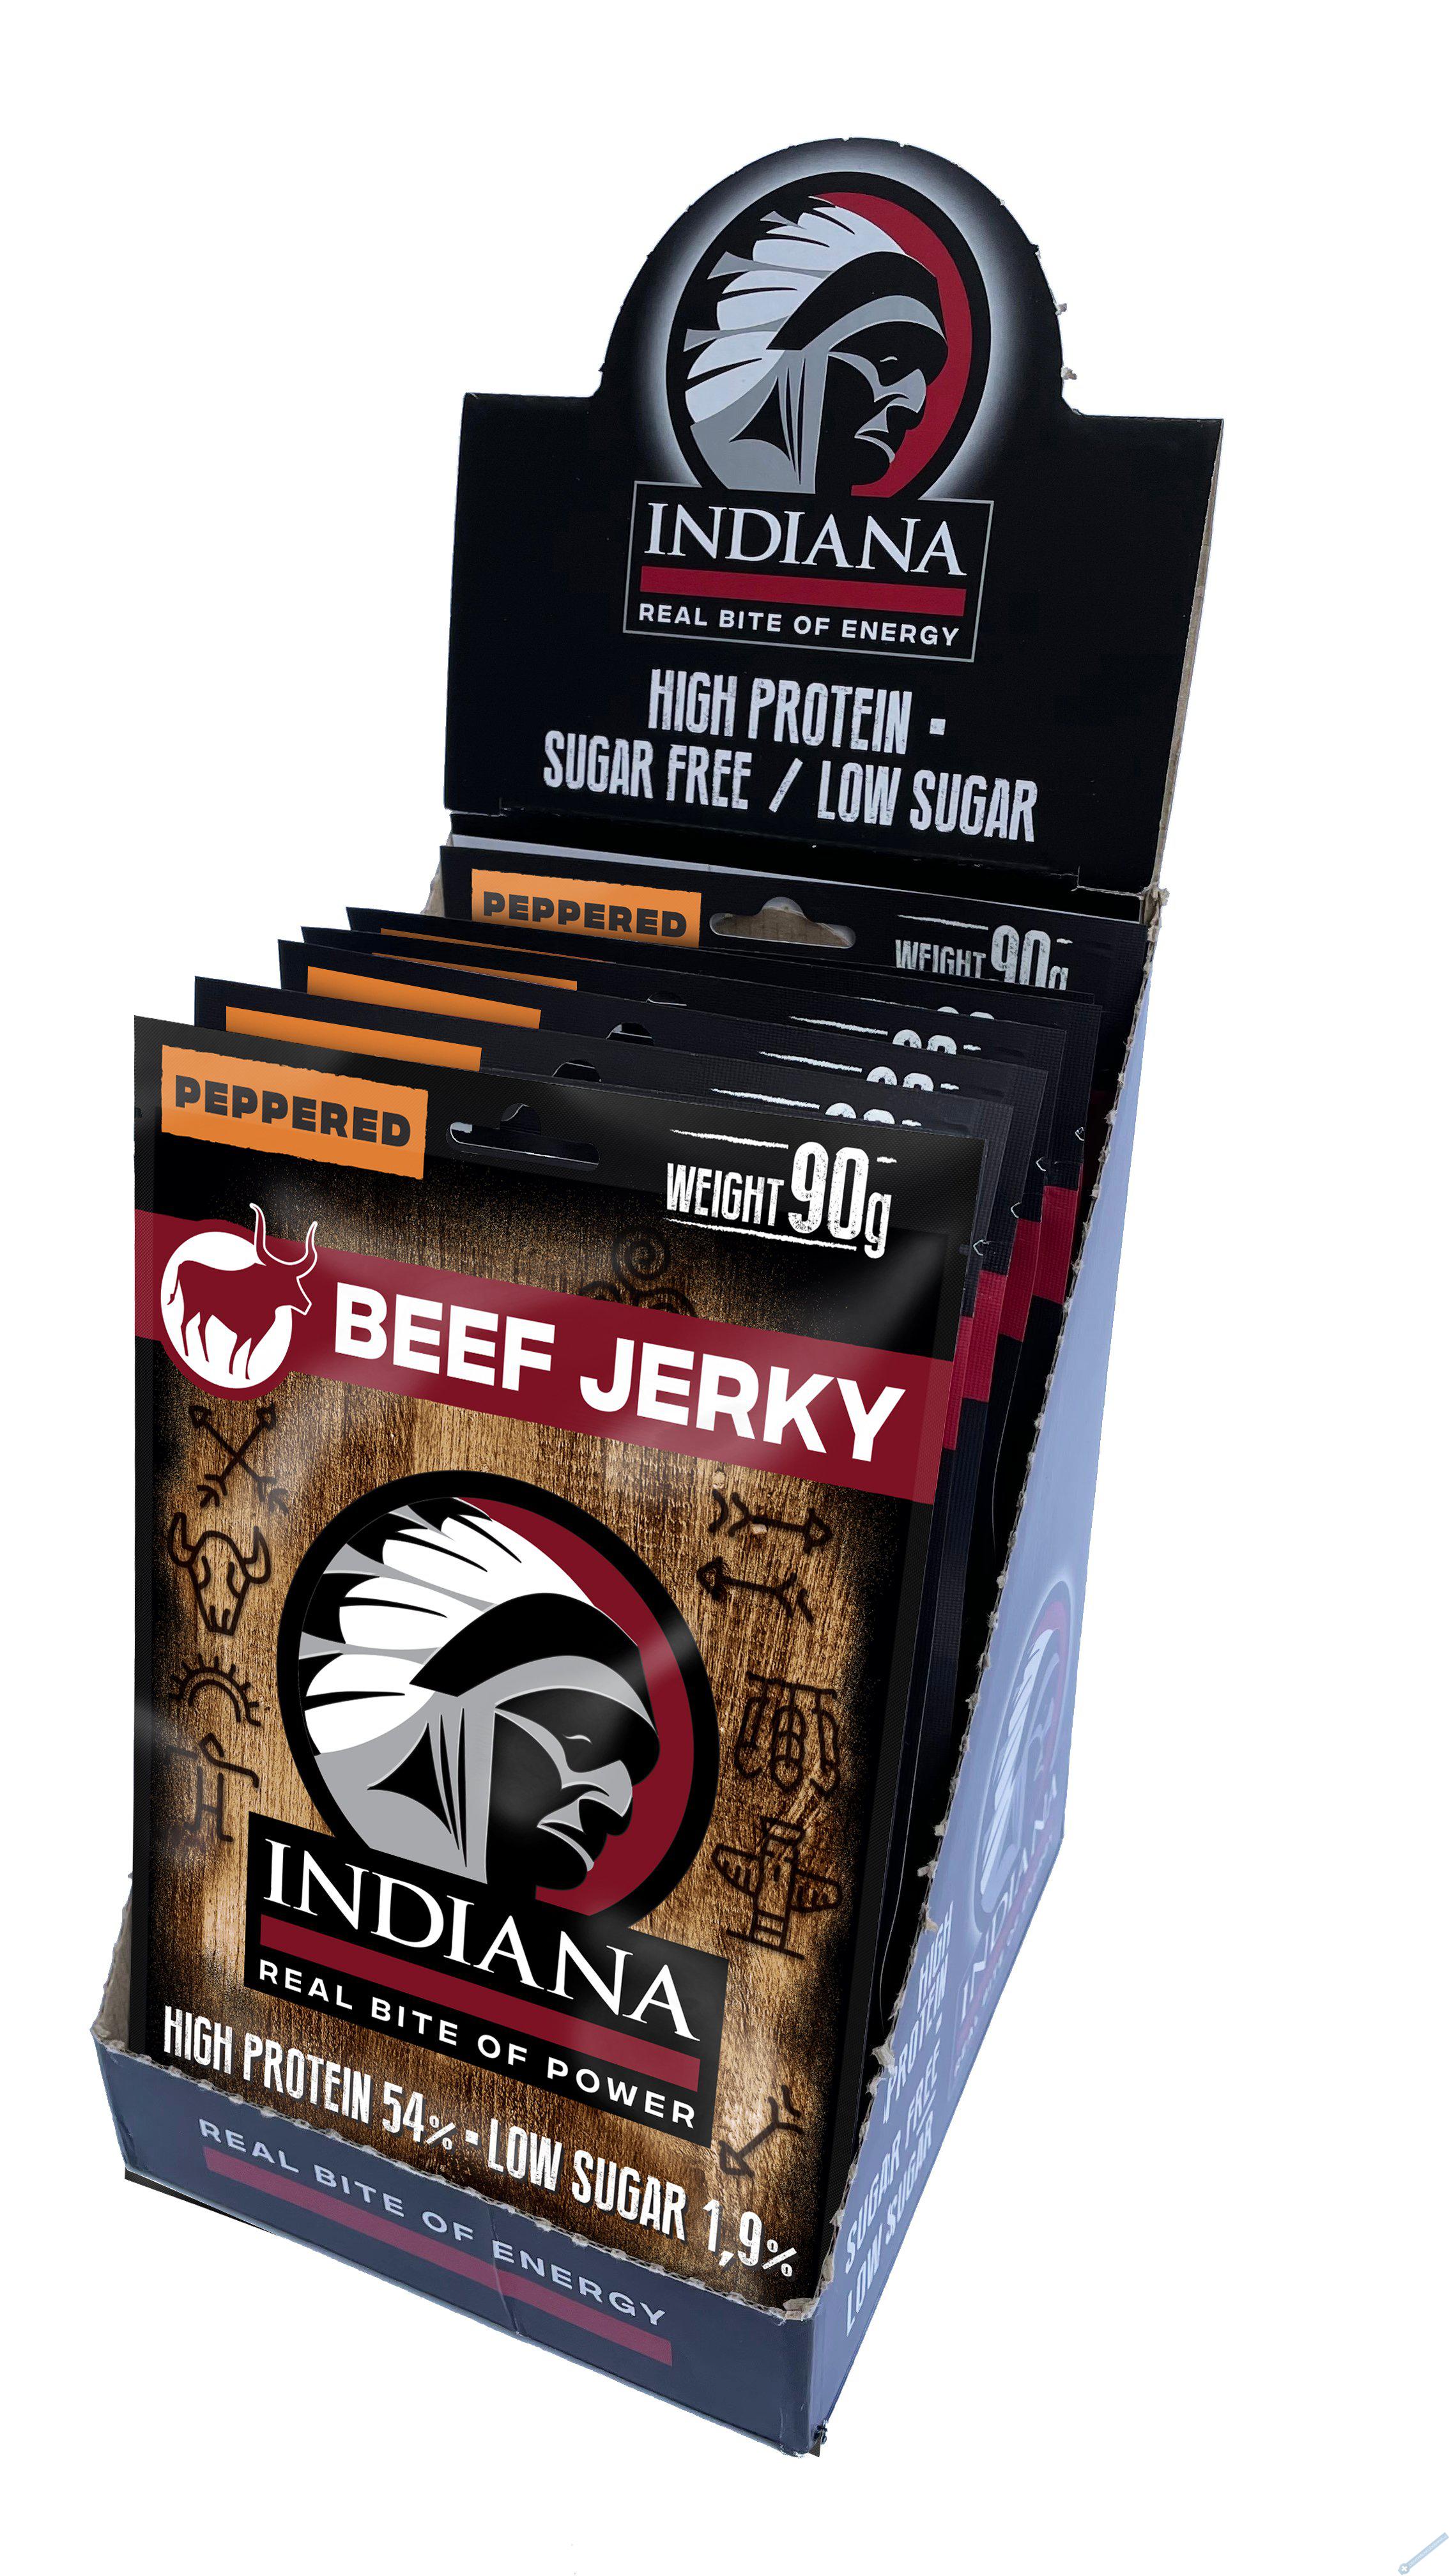 INDIANA Jerky hovz Peppered ZIP 720g - display